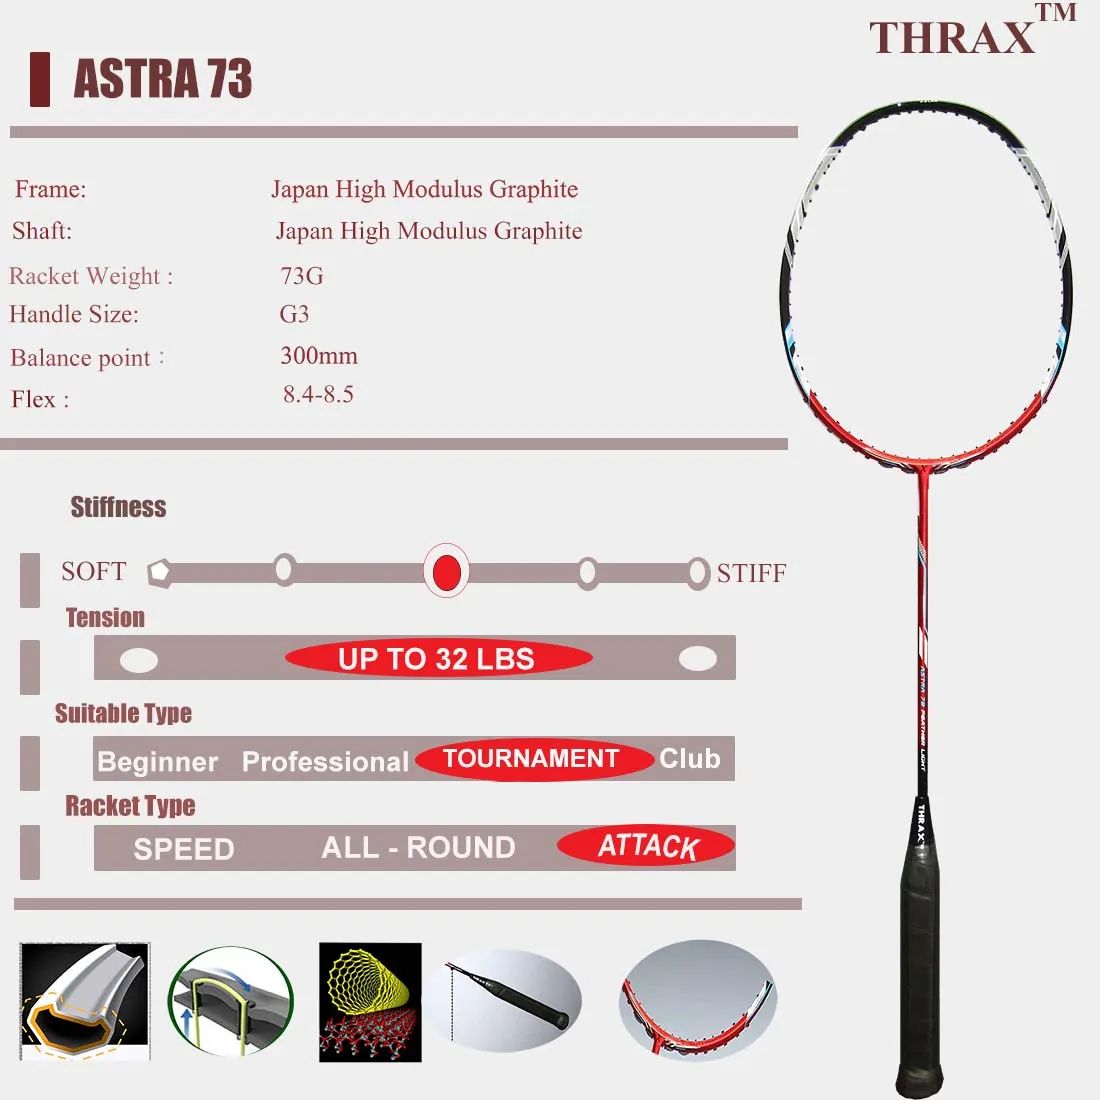 Thrax_Astra_73_Badminton_Racket_Specification_A